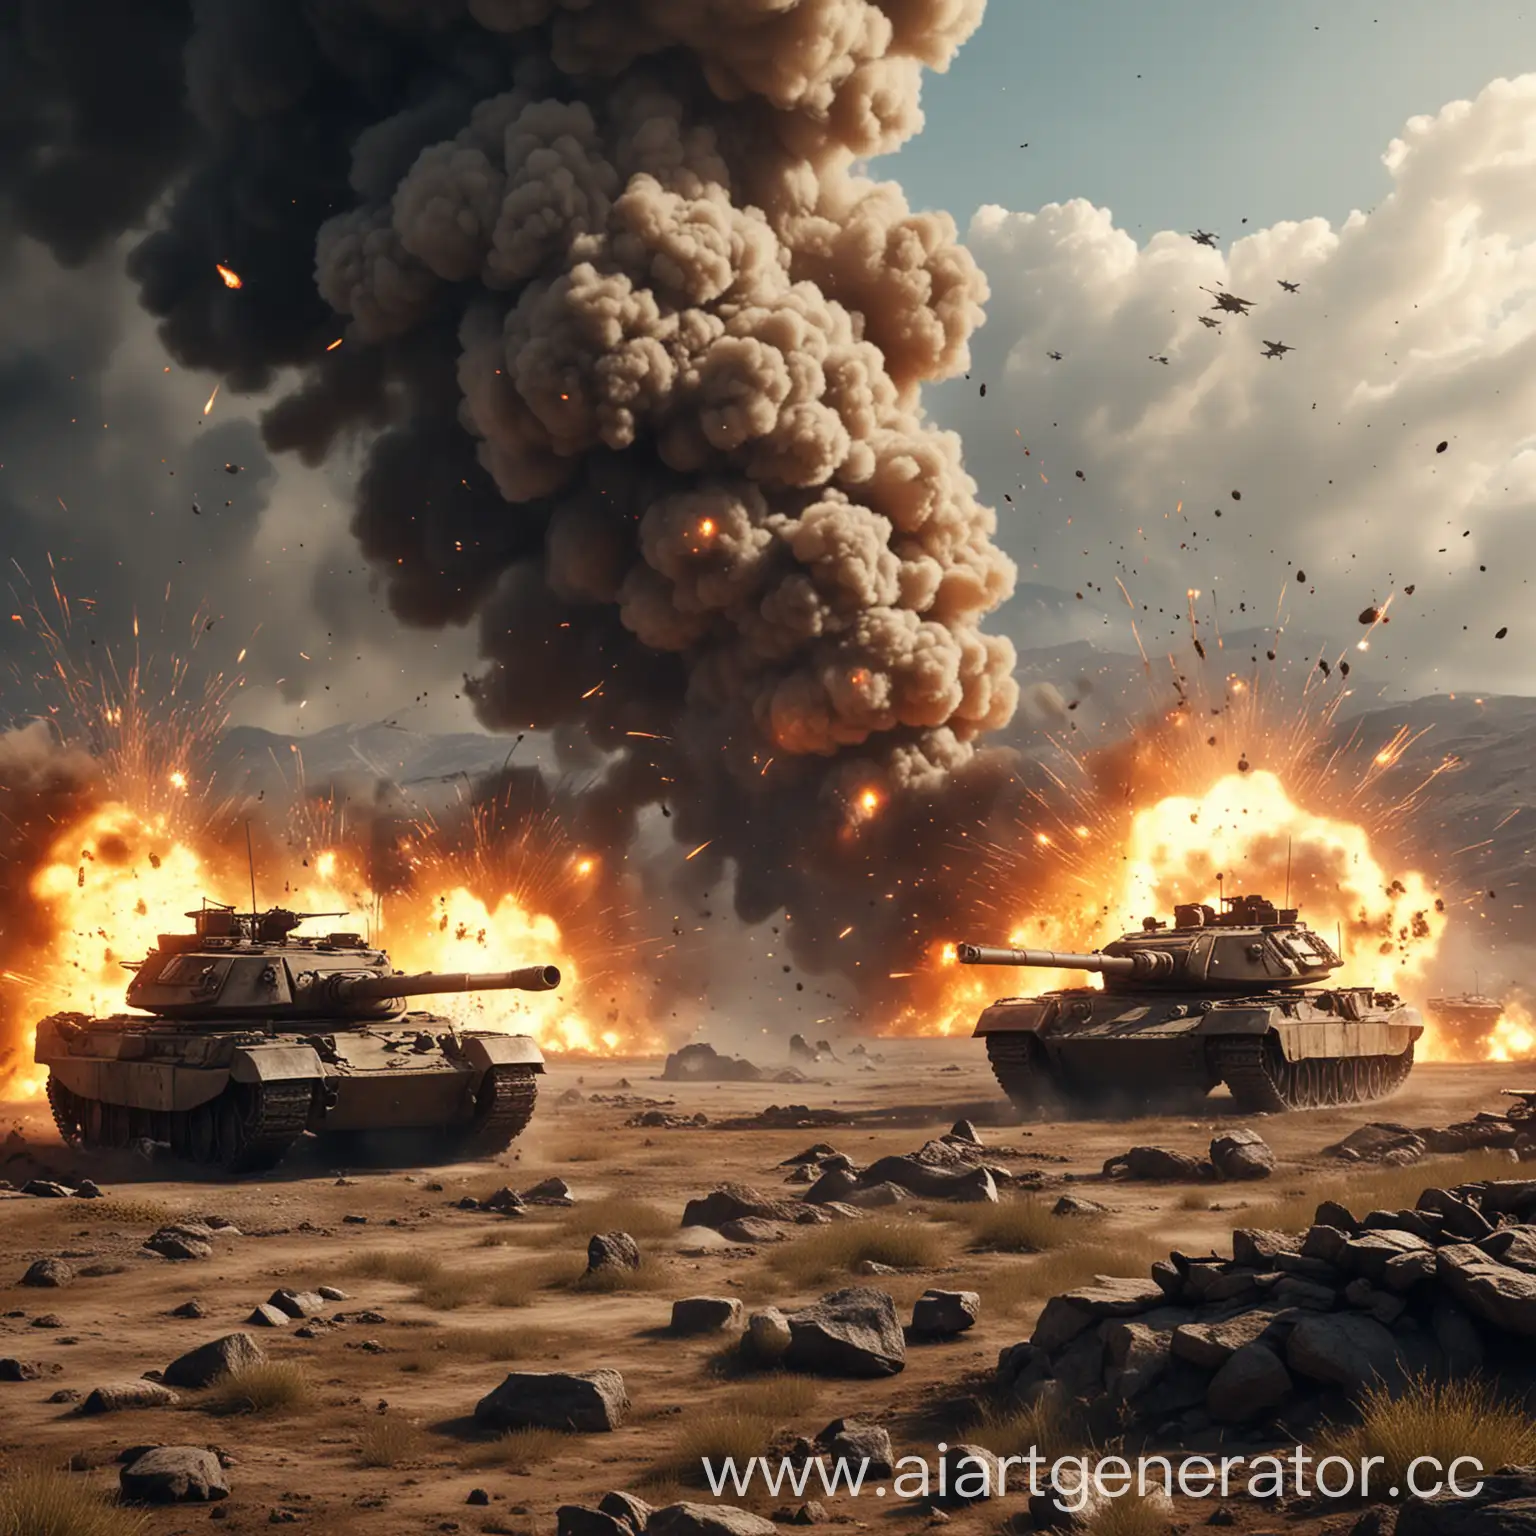 Battle-Tanks-in-Dynamic-GameStyle-Battlefield-with-Explosions-and-Fire